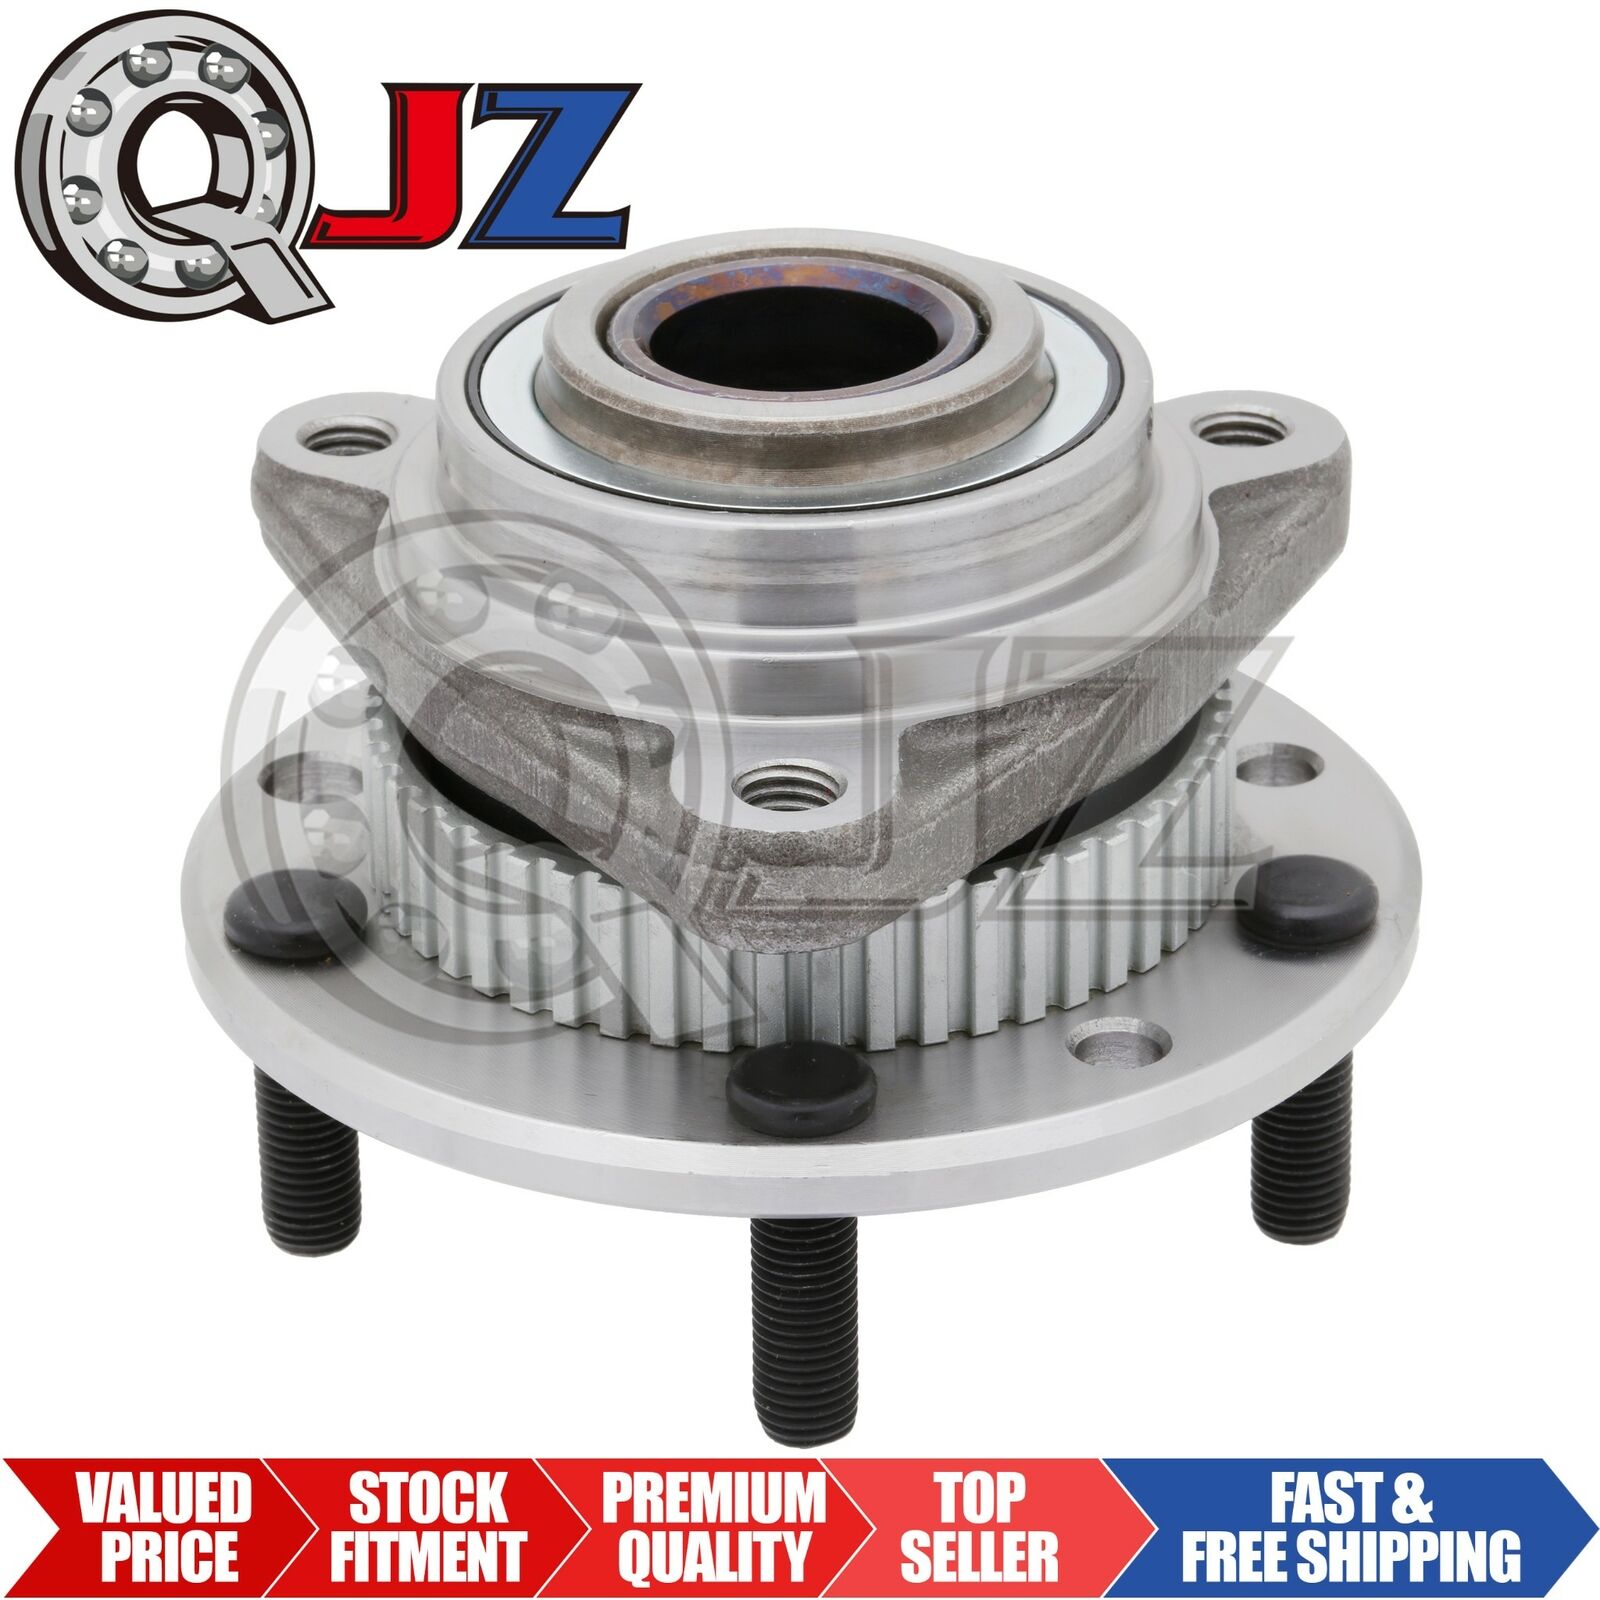 [FRONT(Qty.1pc)] Wheel Hub Assembly for 1990 GMC S15 Pickup 4WD 2-Wheel ABS